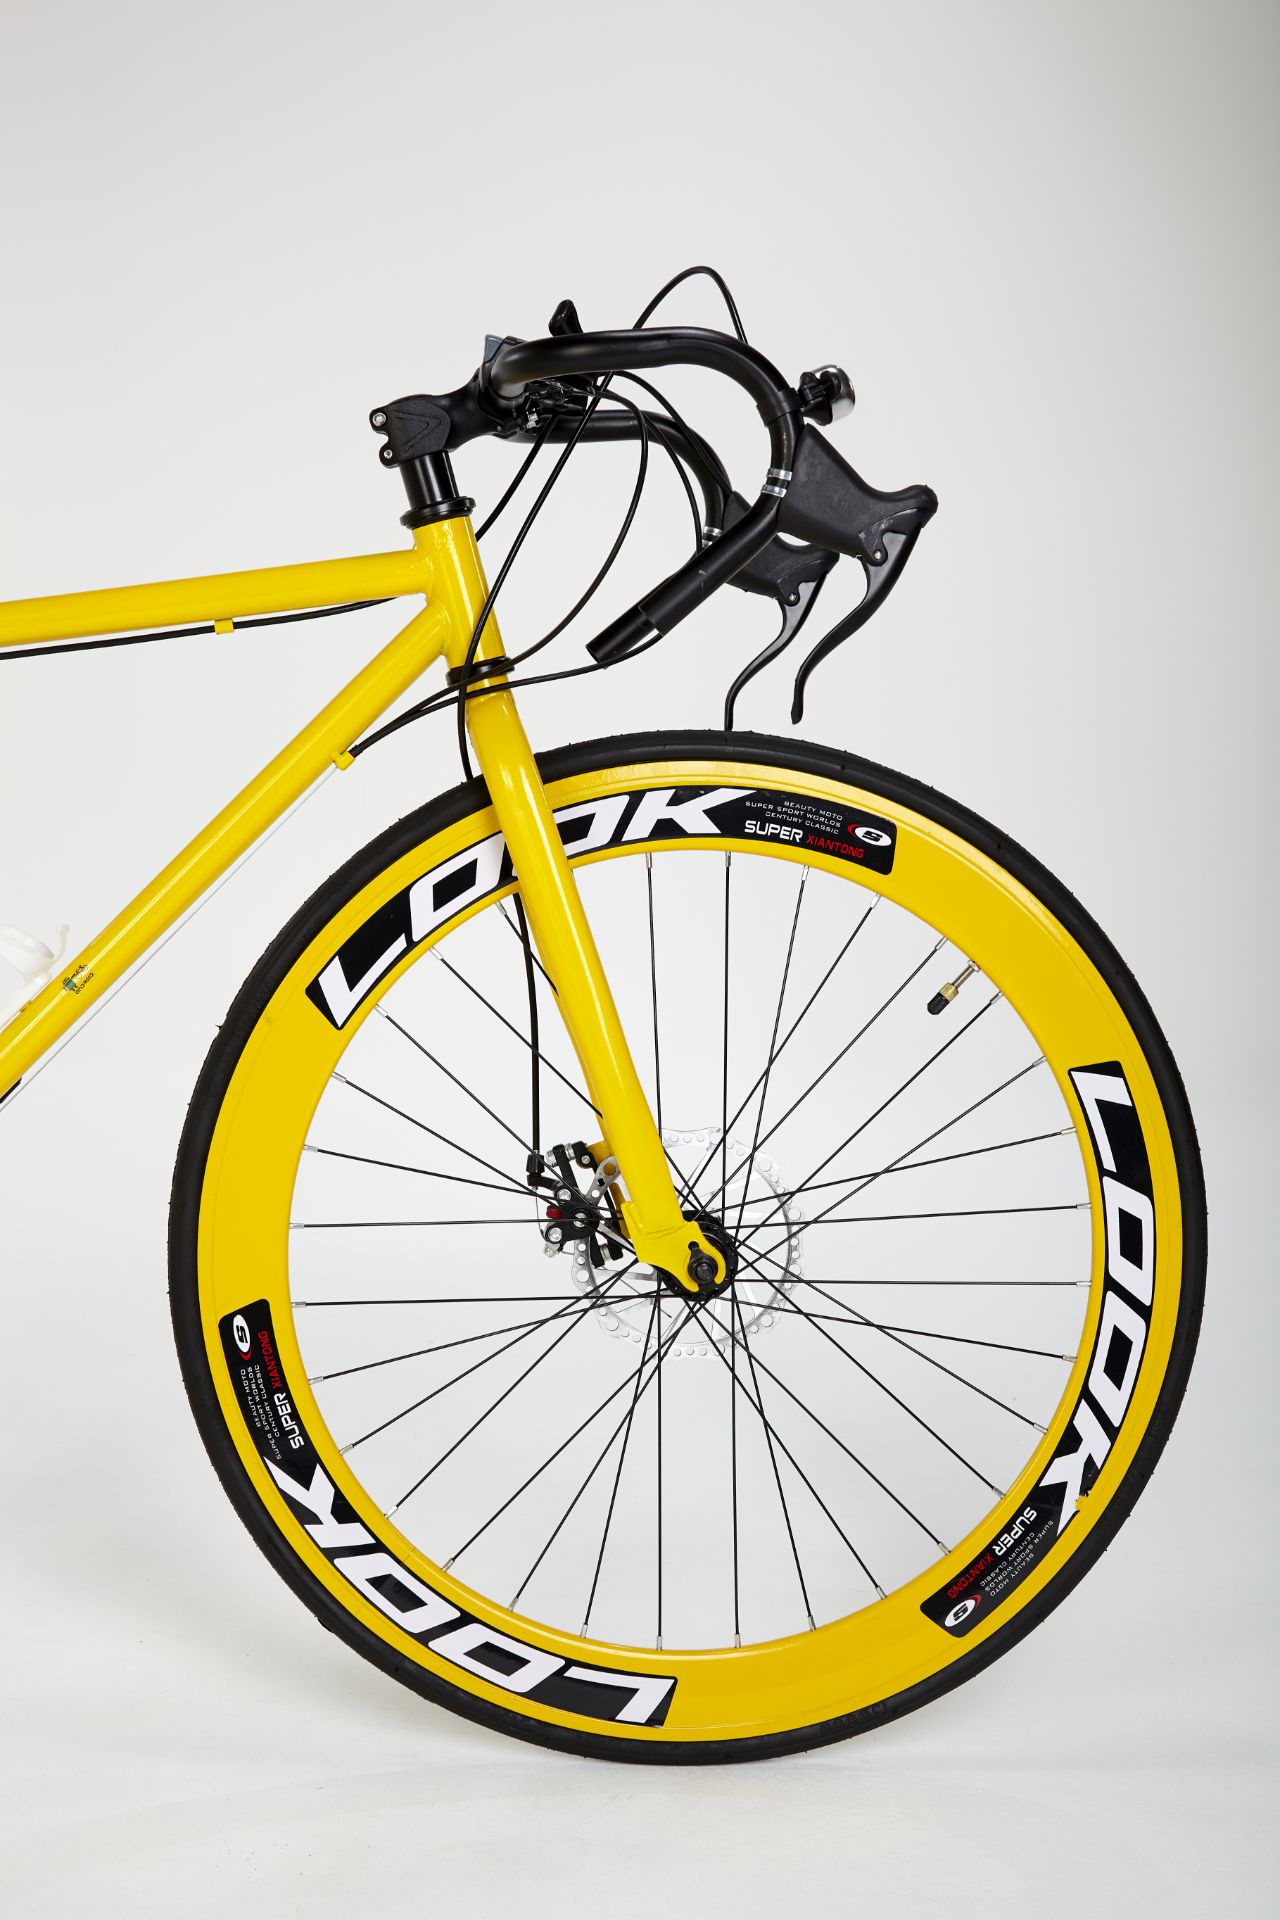 YELLOW STREET BIKE WITH 21 GREAR, BRAKE DISKS, KICK STAND, COOL THIN TYRES - Image 2 of 10